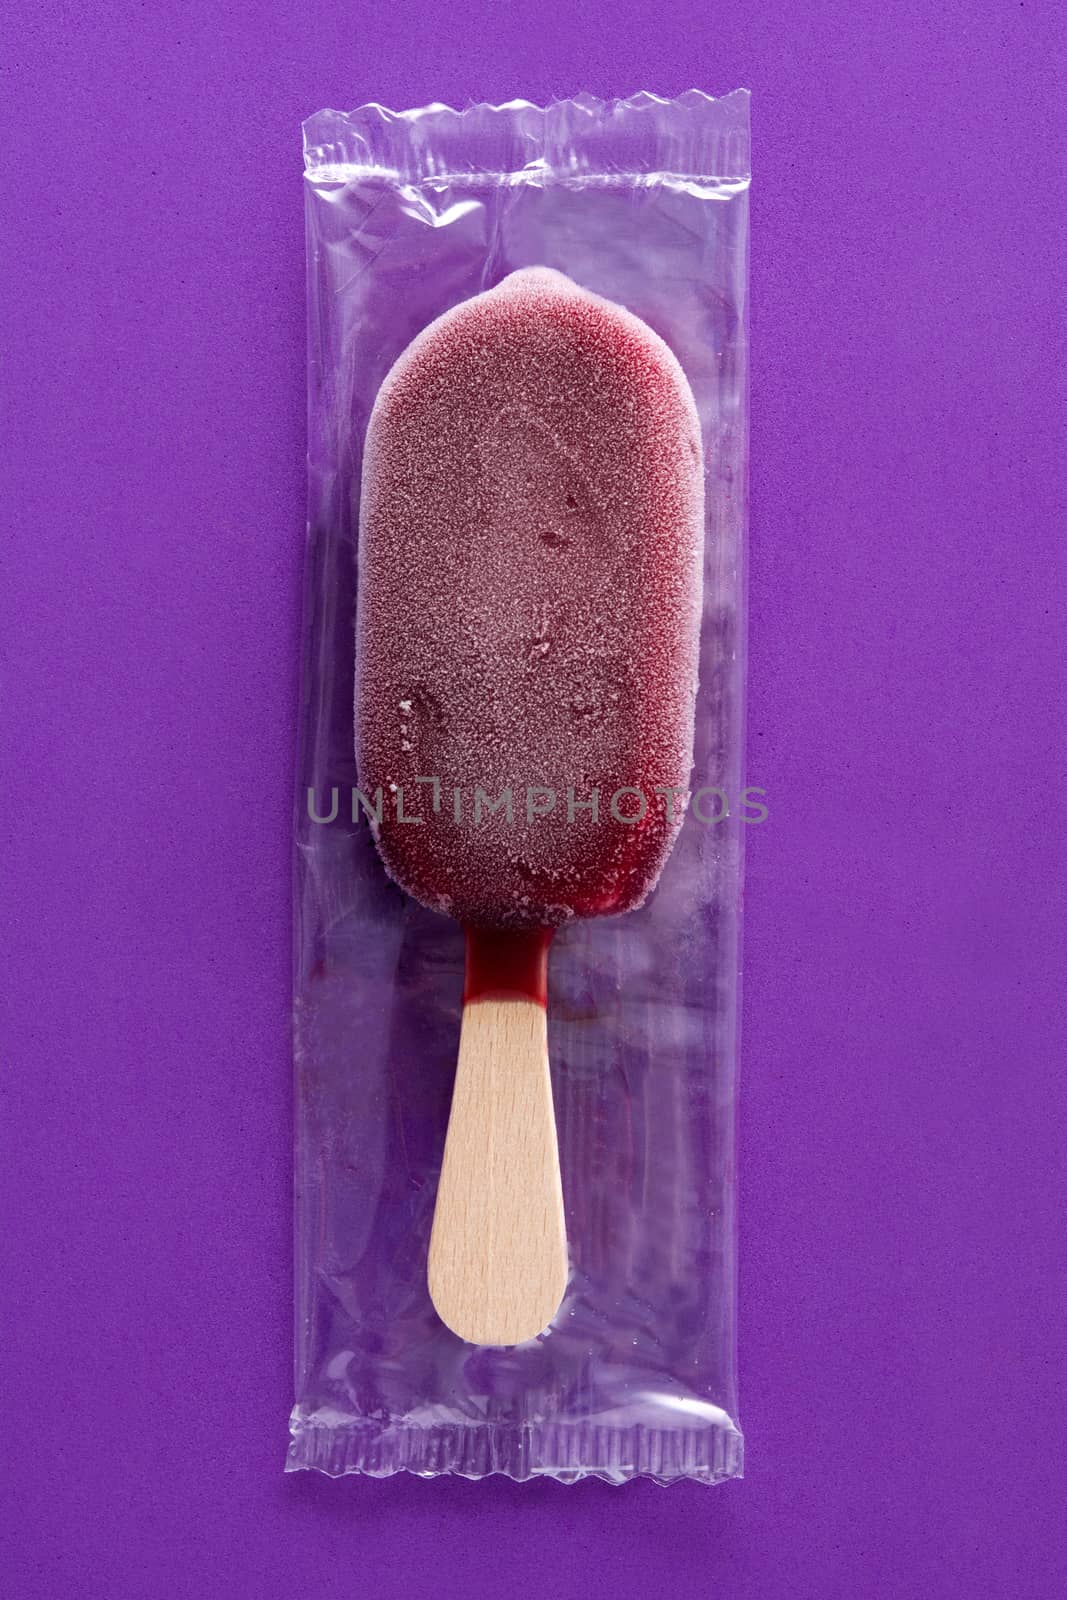 Packed strawberry popsicle on violet background. by chandlervid85